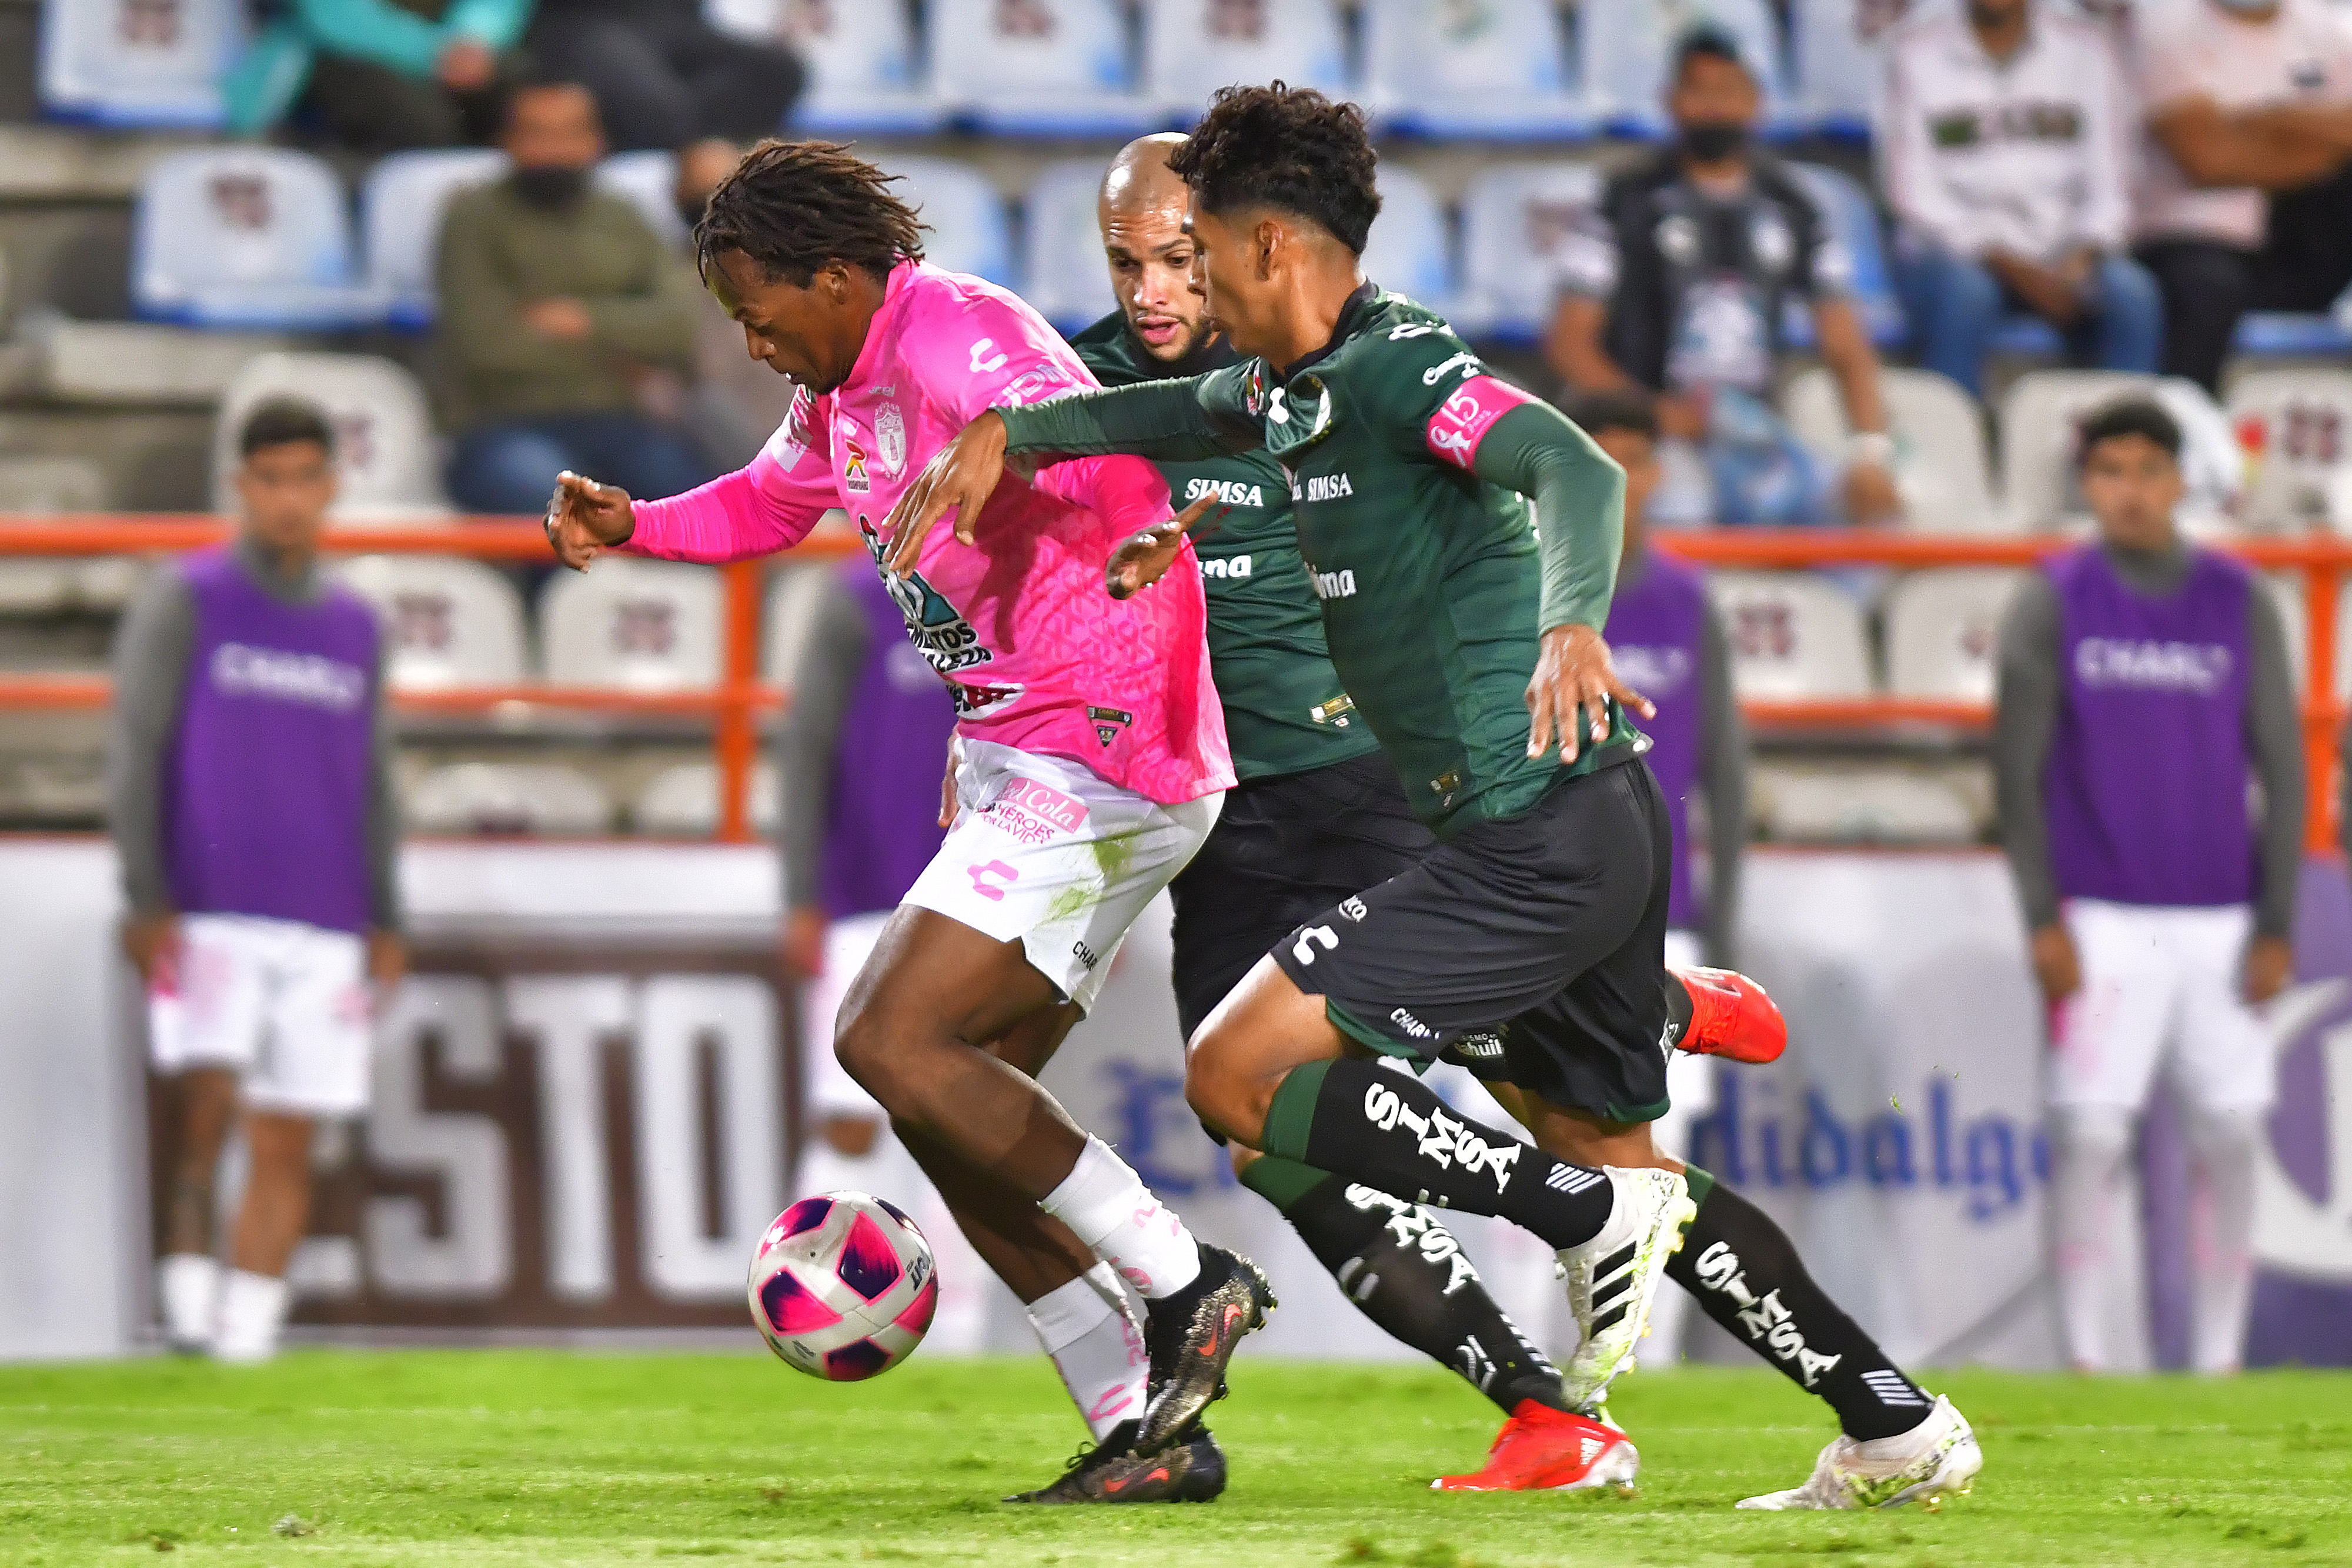 Romario Andres Ibarra (L) of Pachuca fights for the ball with Matheus Doria (C) and Hugo Isaac Rodriguez (R) of Santos during the 13th round match between Pachuca and Santos Laguna as part of the Torneo Grita Mexico A21 Liga MX at Hidalgo Stadium on October 16, 2021 in Pachuca, Mexico.